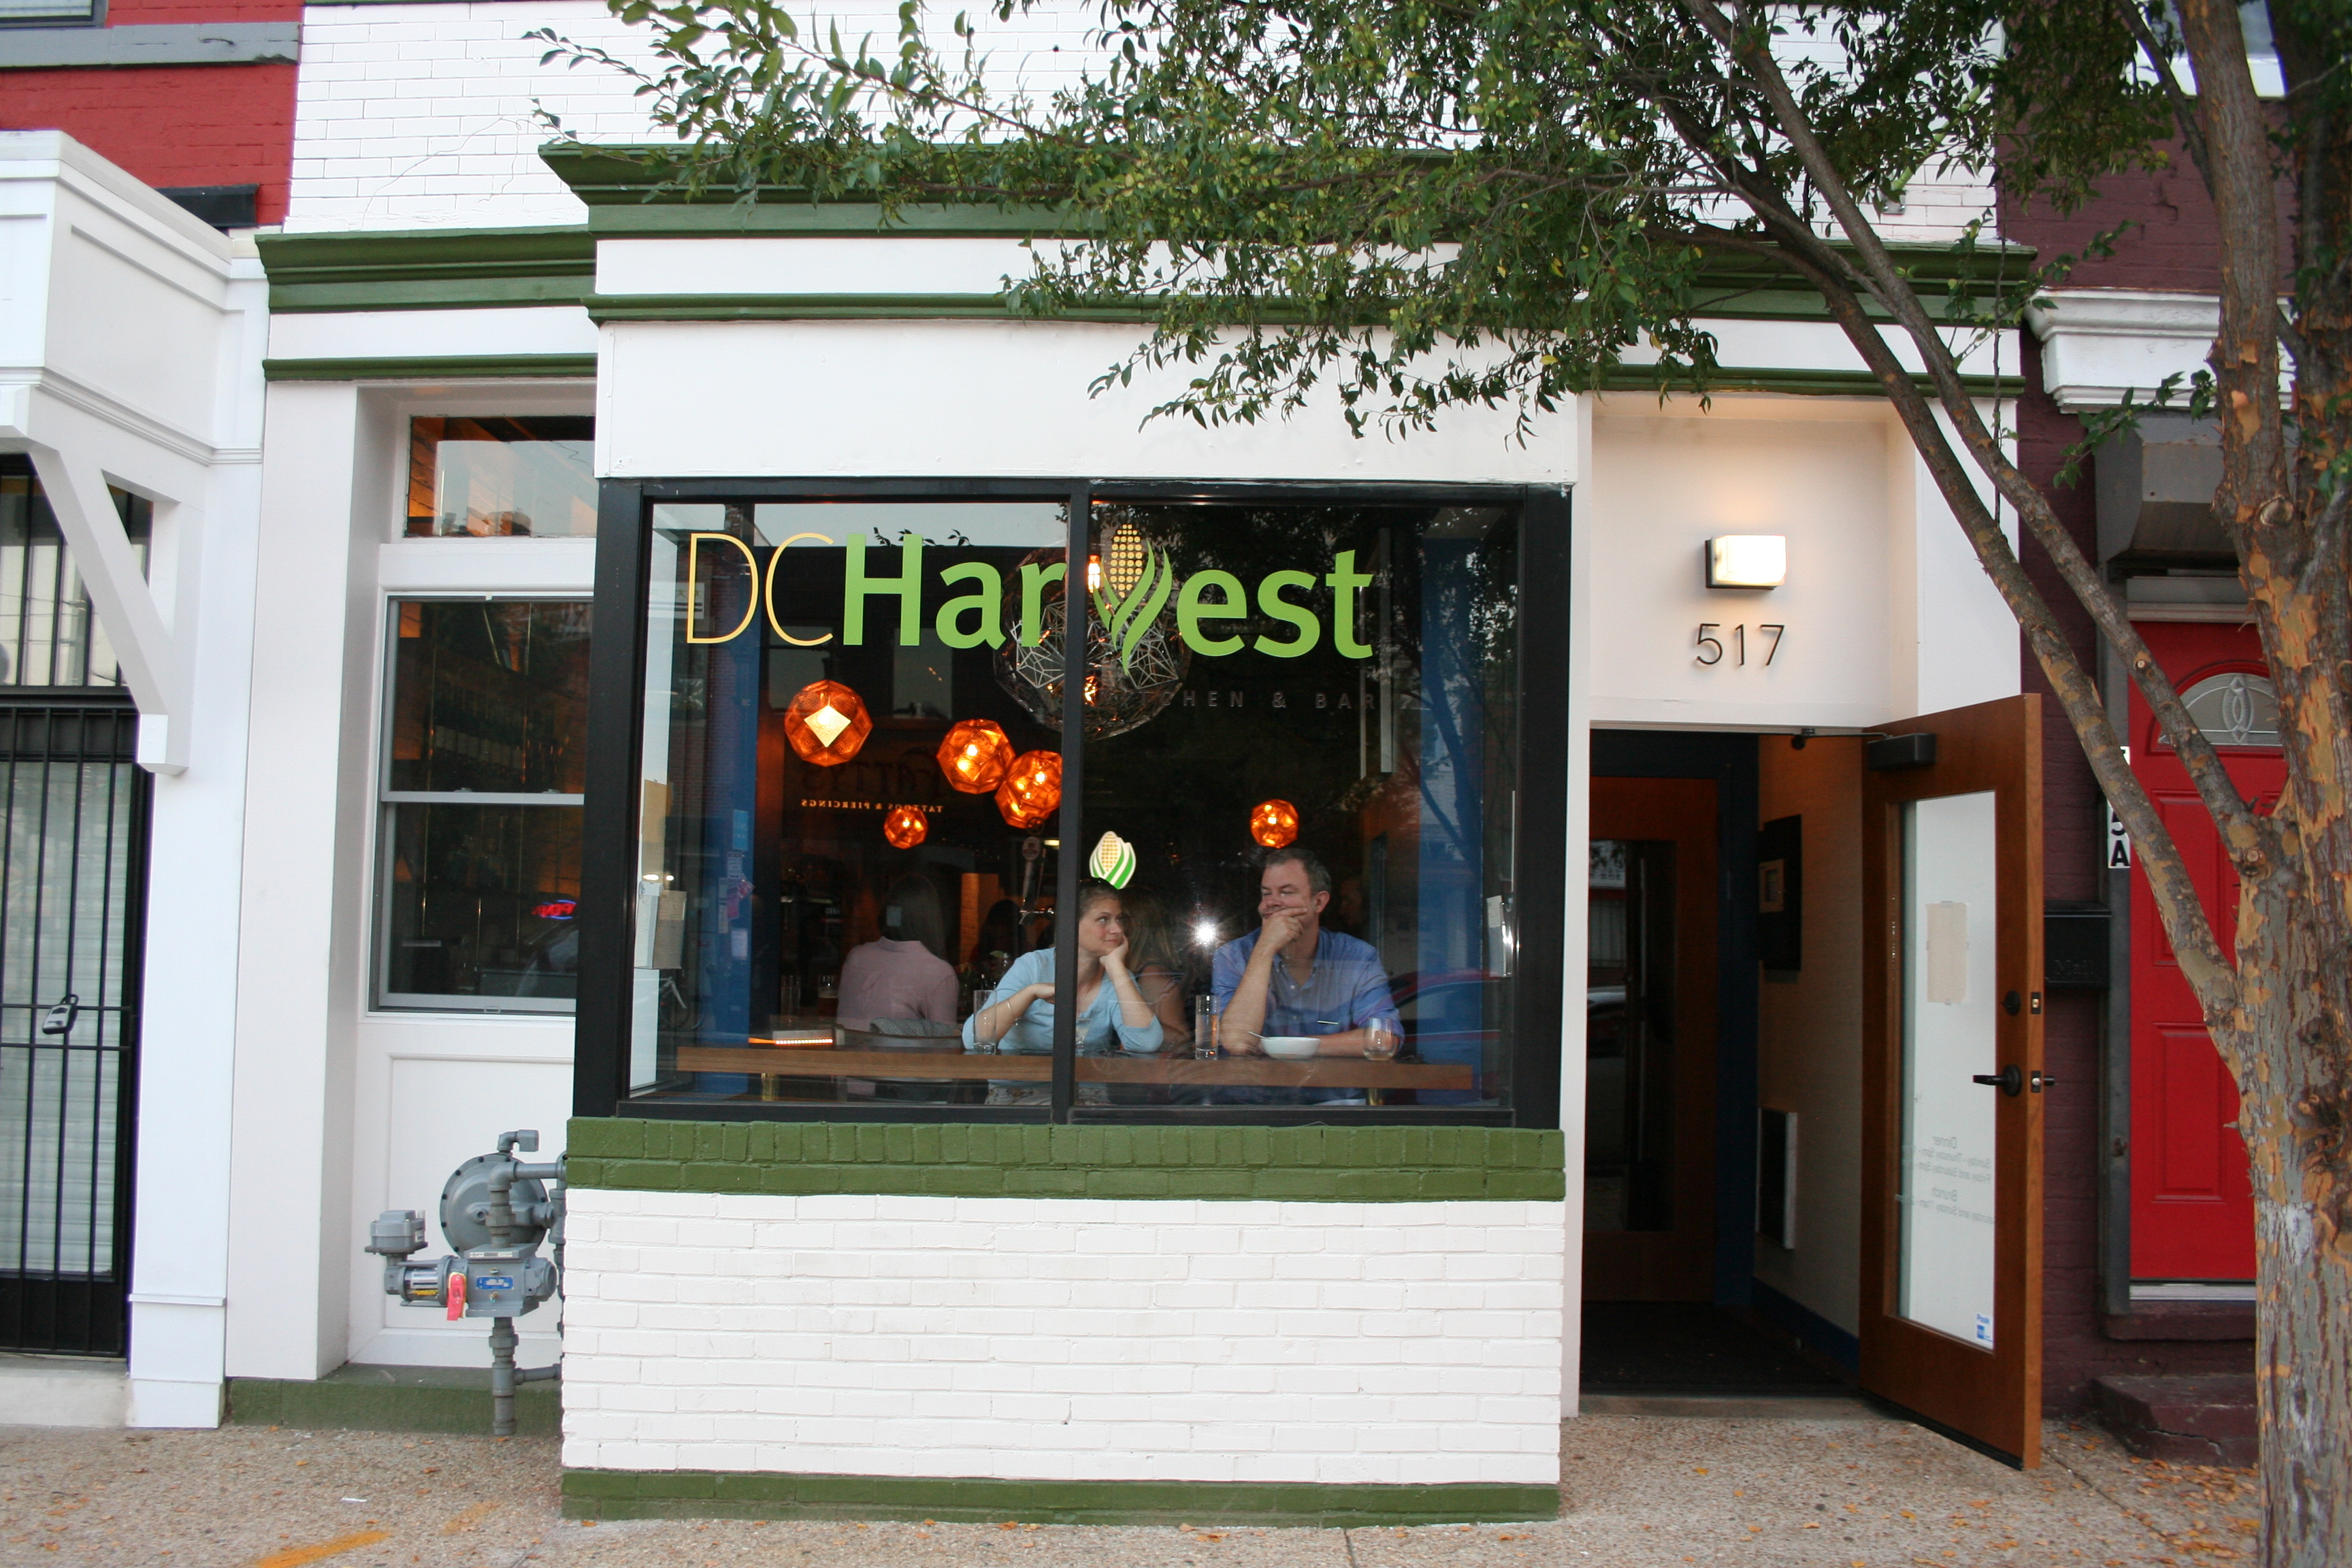 Brothers Arthur and Jared Ringel opened DC Harvest, which uses mostly local ingredients, in September on H Street NE. (Photo: Mark Heckathorn/DC on Heels)